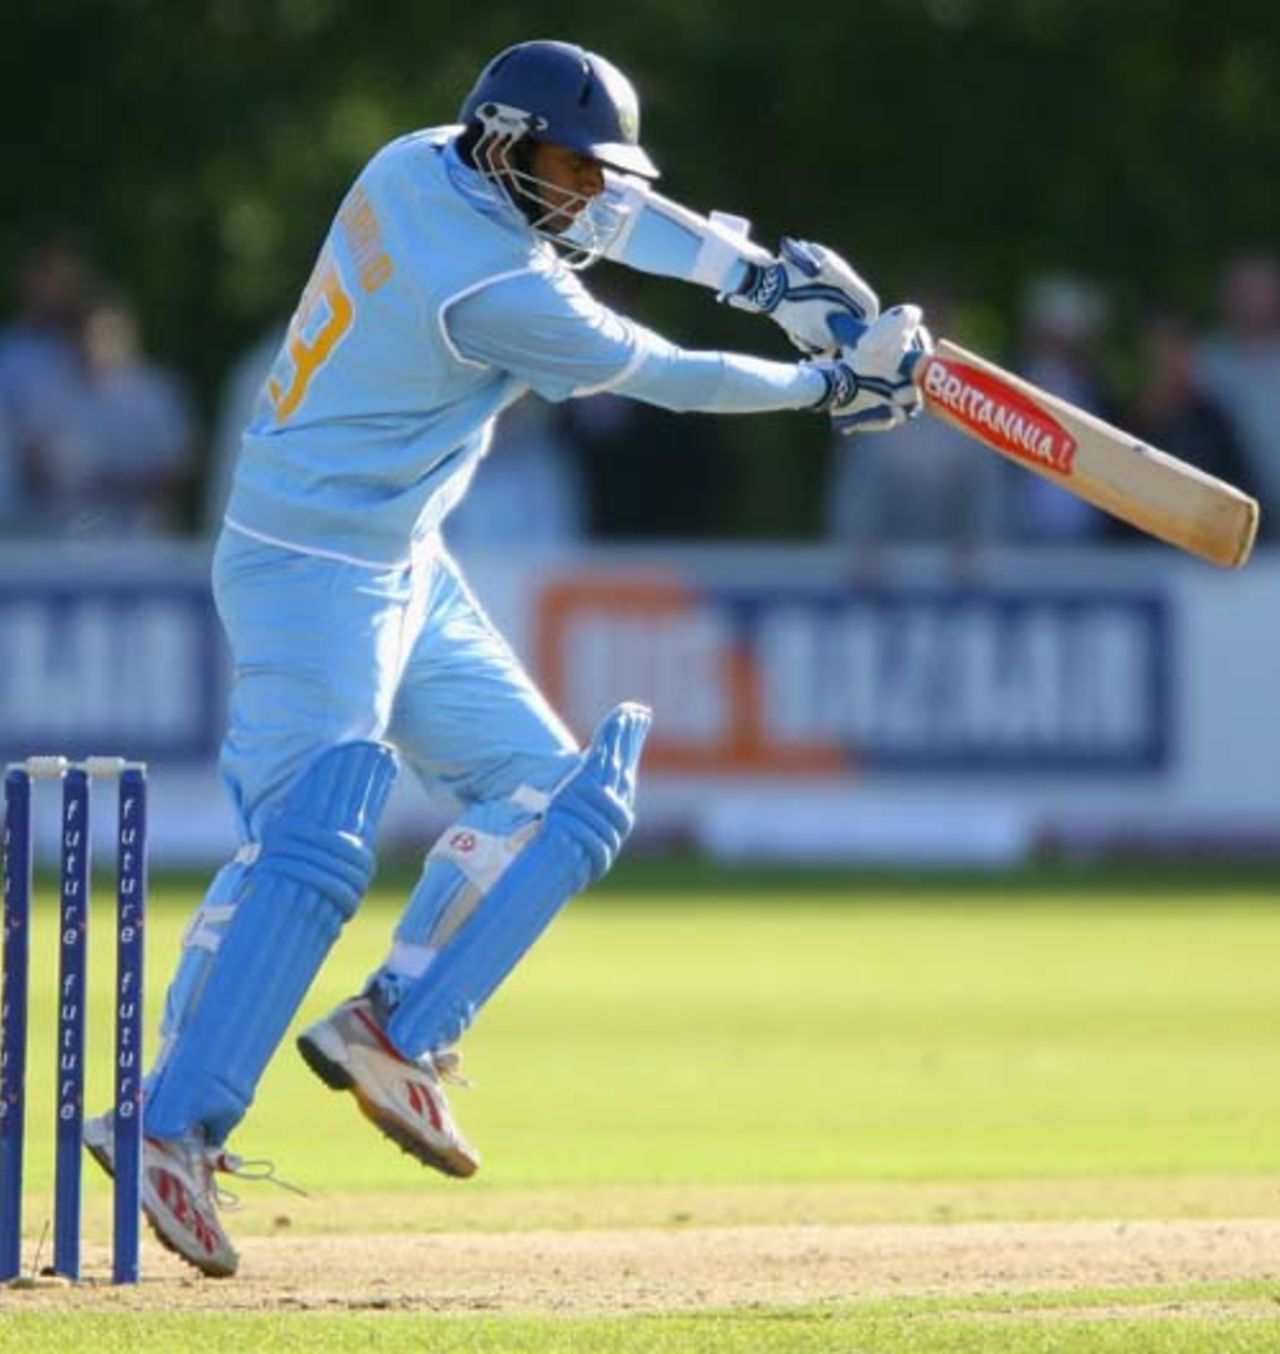 Rahul Dravid cuts en route to his 32 which helped India fight back, India v South Africa, 3rd ODI, Belfast, July 1, 2007